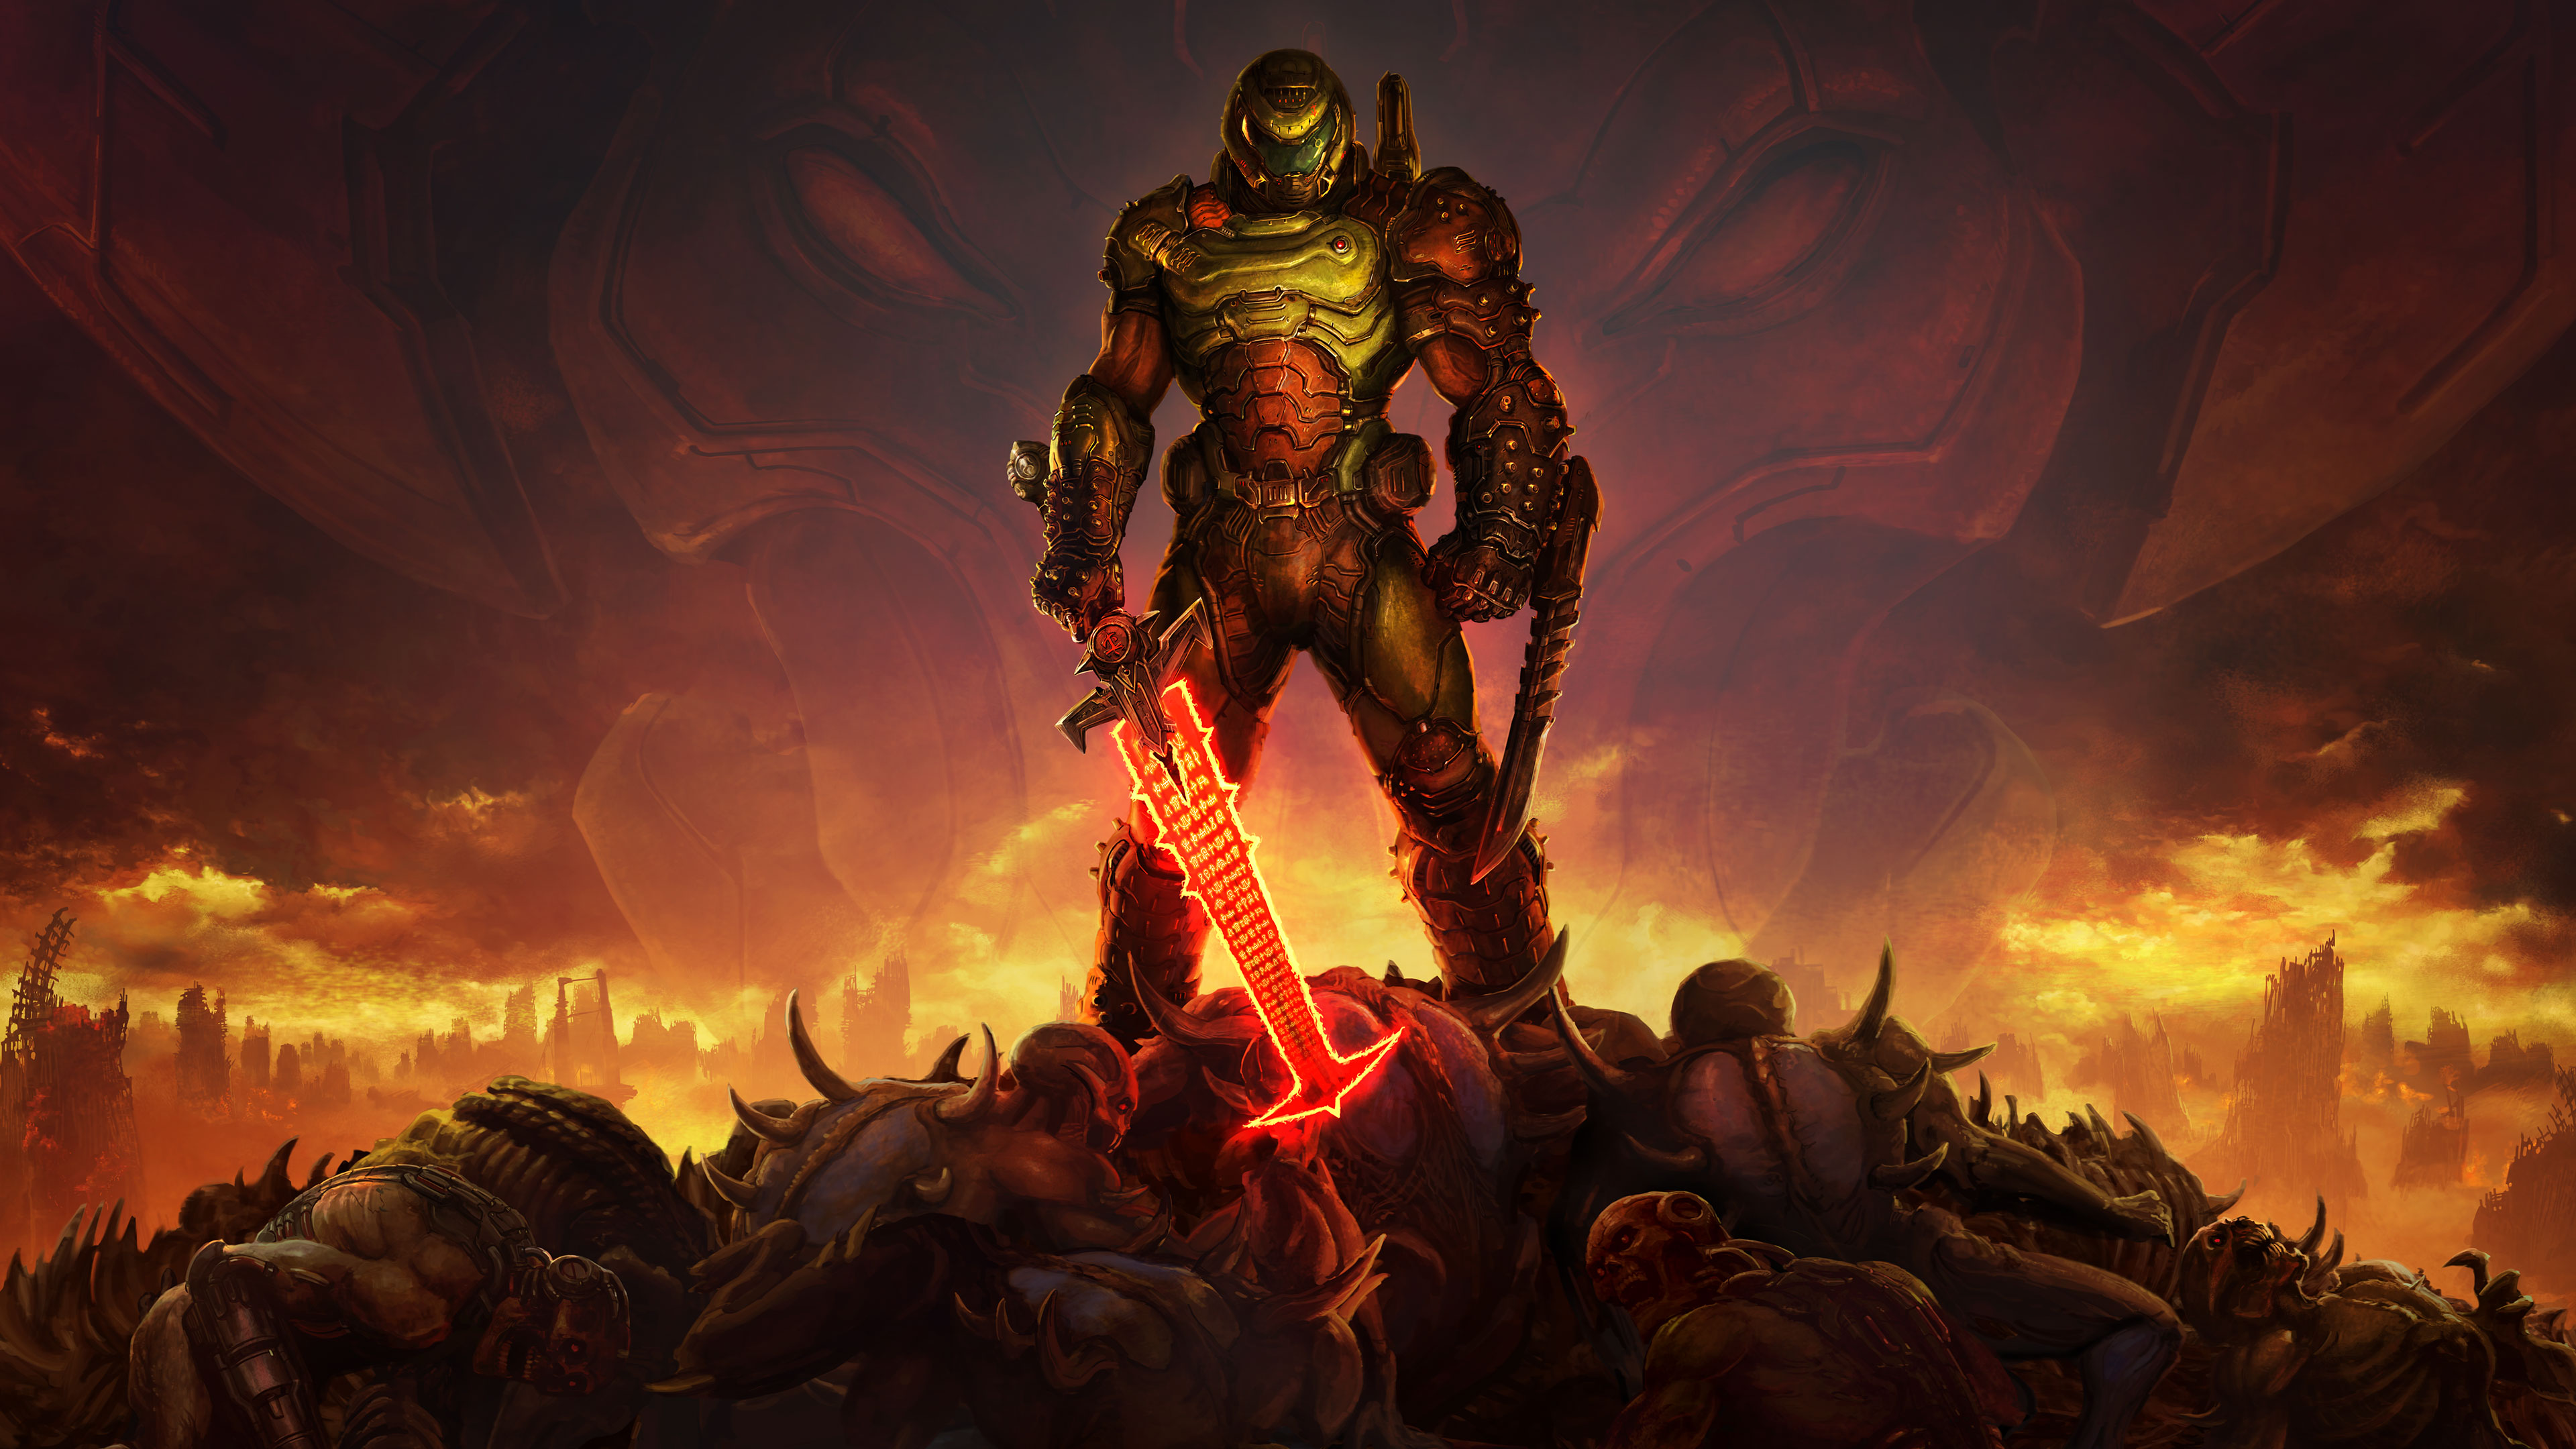 Doom 4k Wallpapers For Your Desktop Or Mobile Screen Free And Easy Images, Photos, Reviews